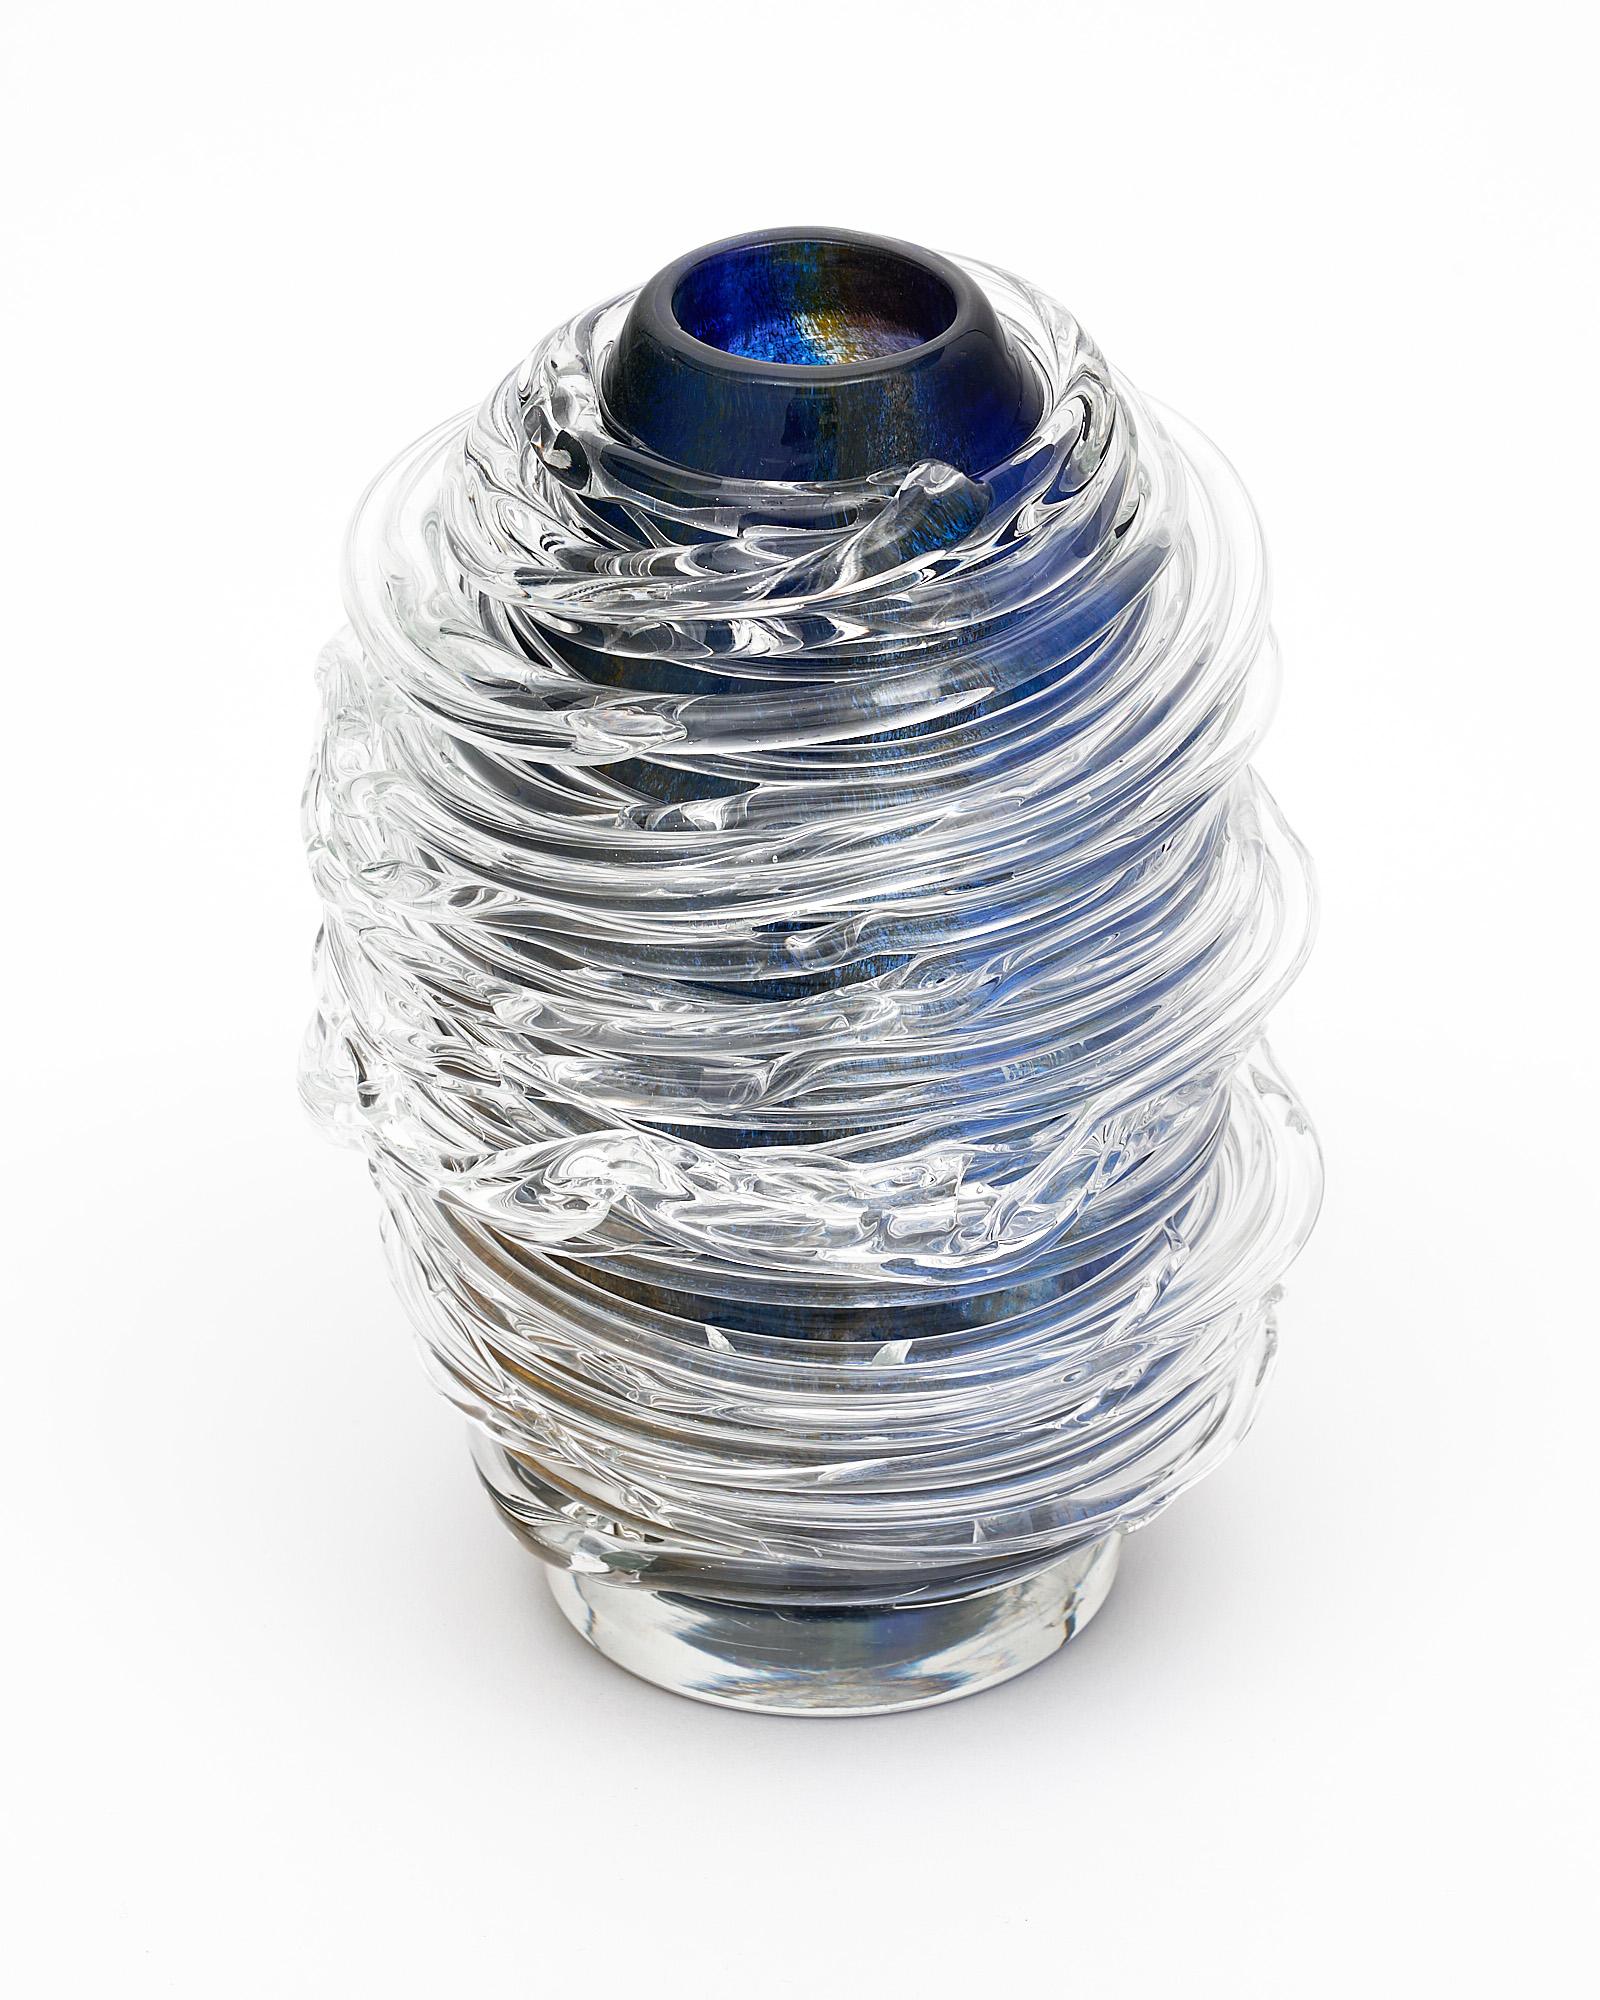 Vase from Murano, Italy. Hand-blown, the transparent glass still in fusion was wrapped around the dark blue main body of the vase. It is a unique piece with movement.